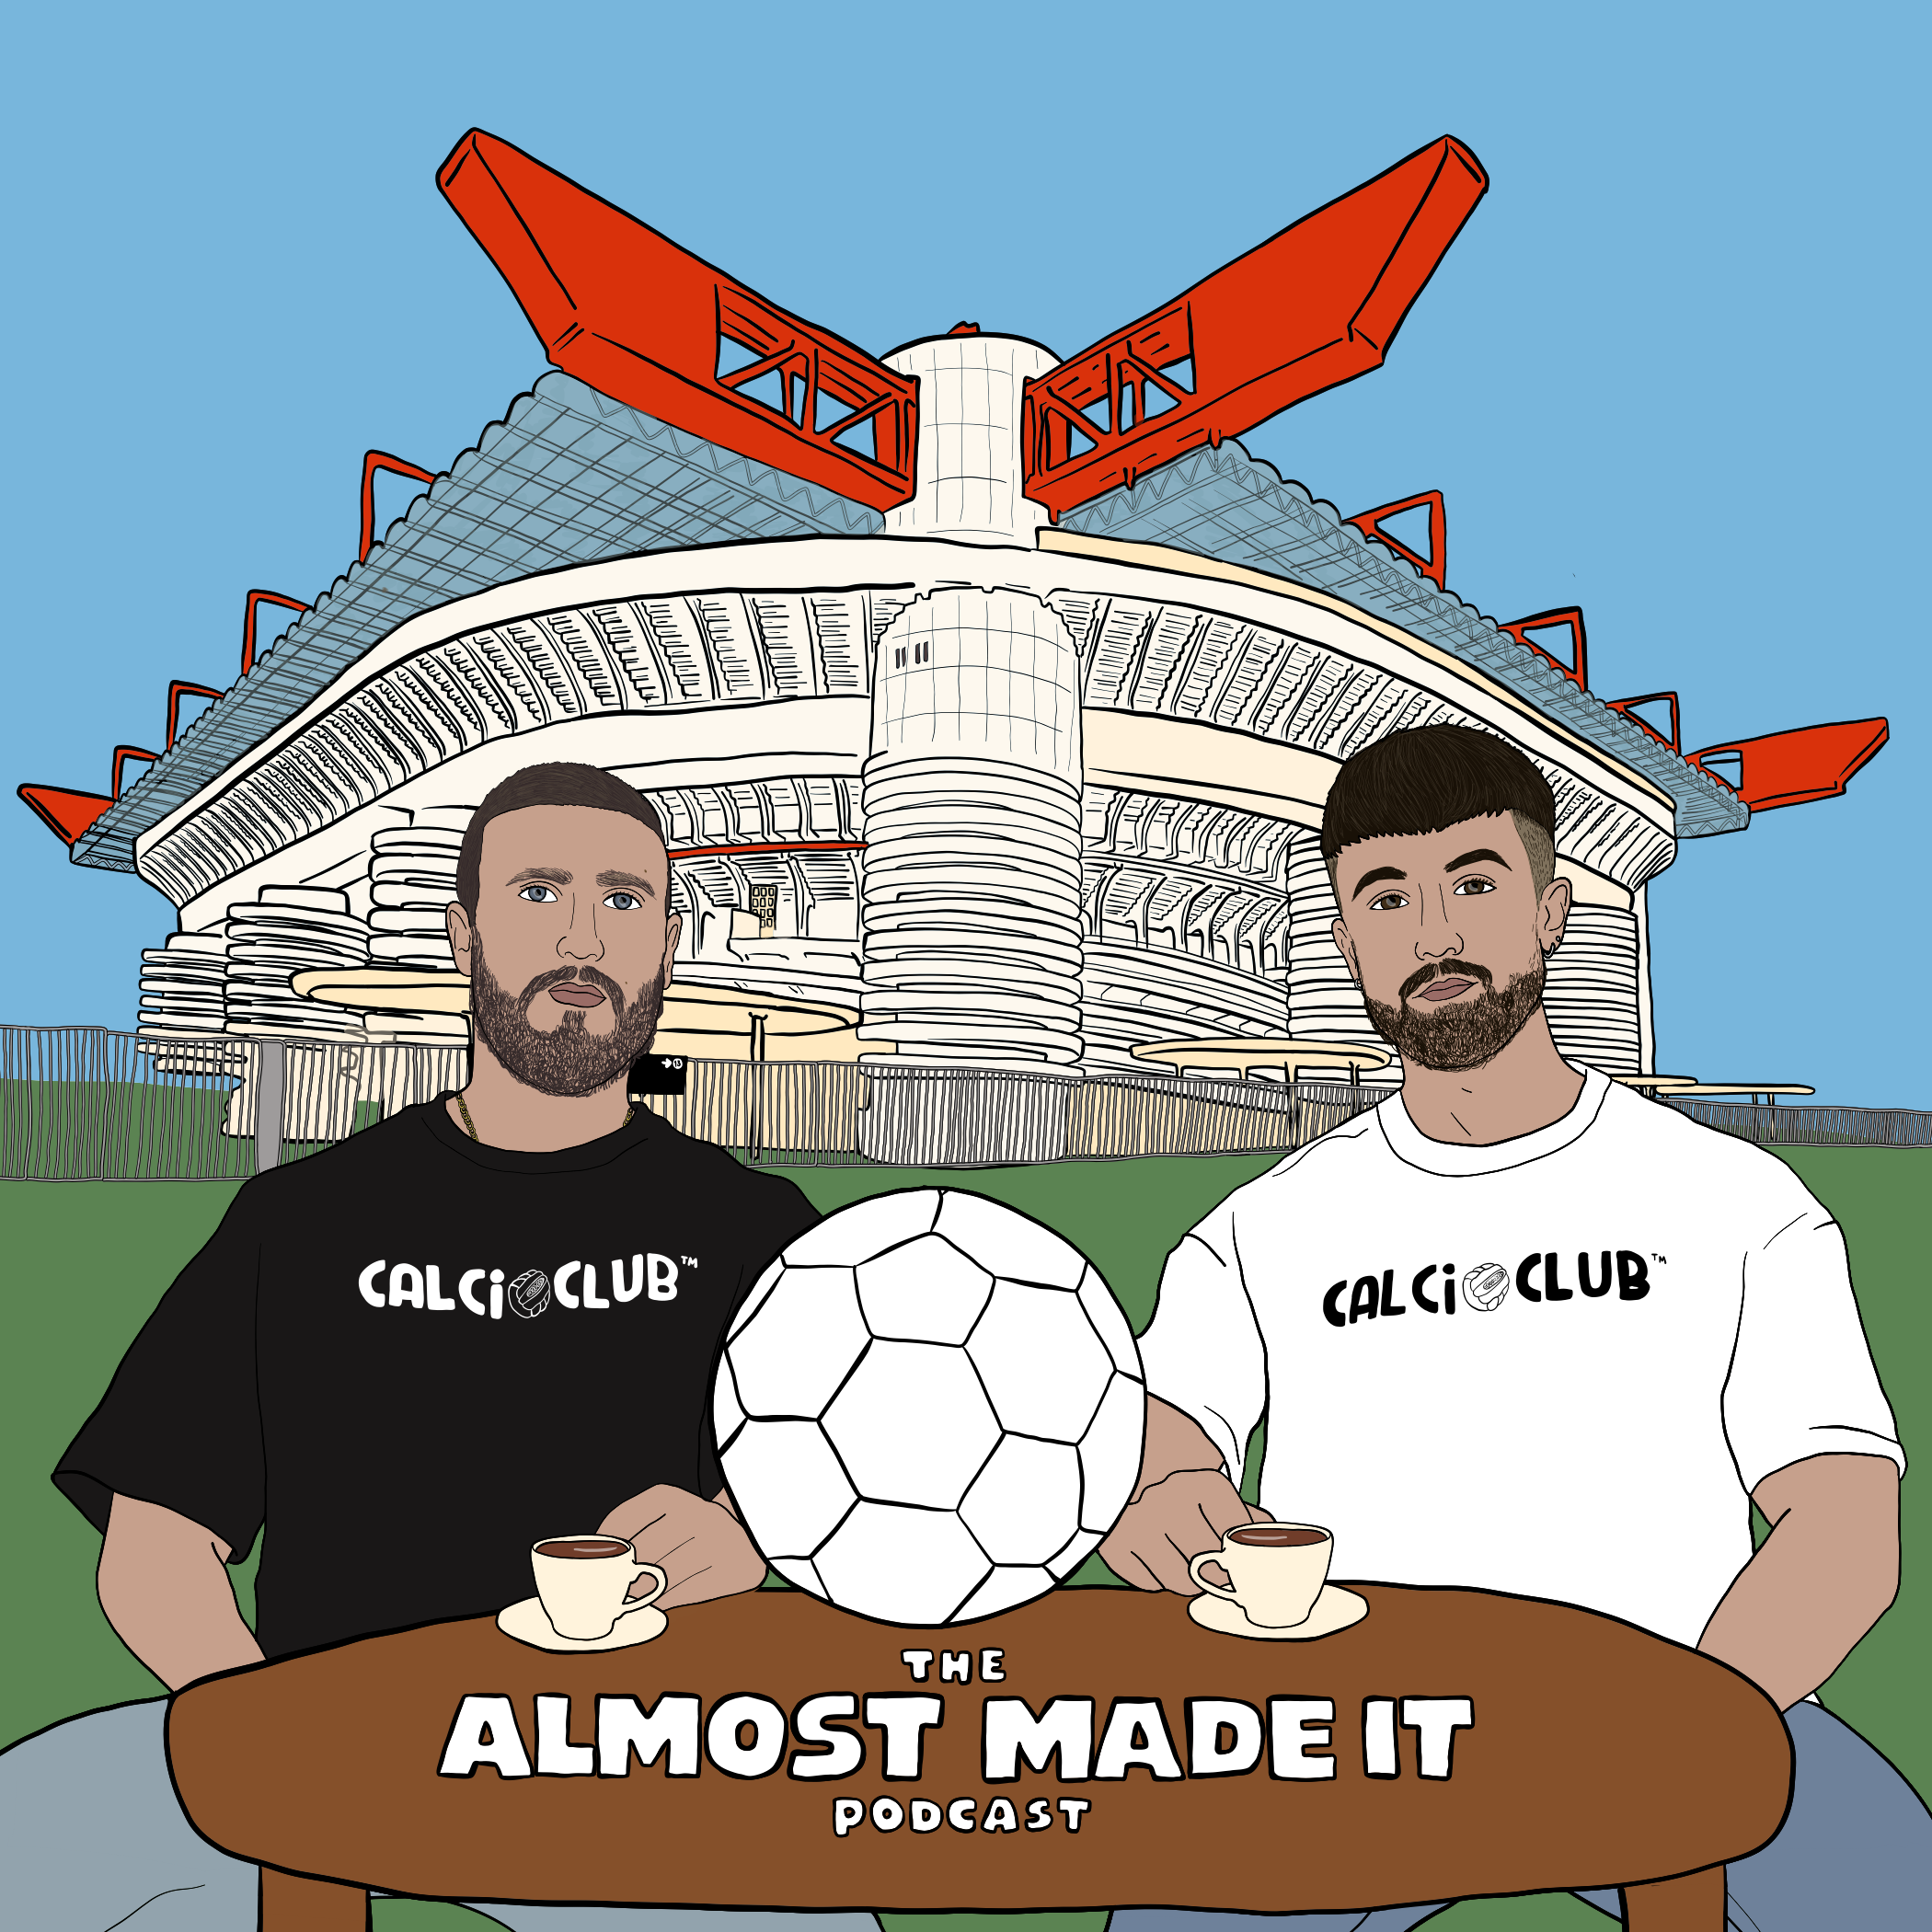 Season 2: The Almost Made It Podcast